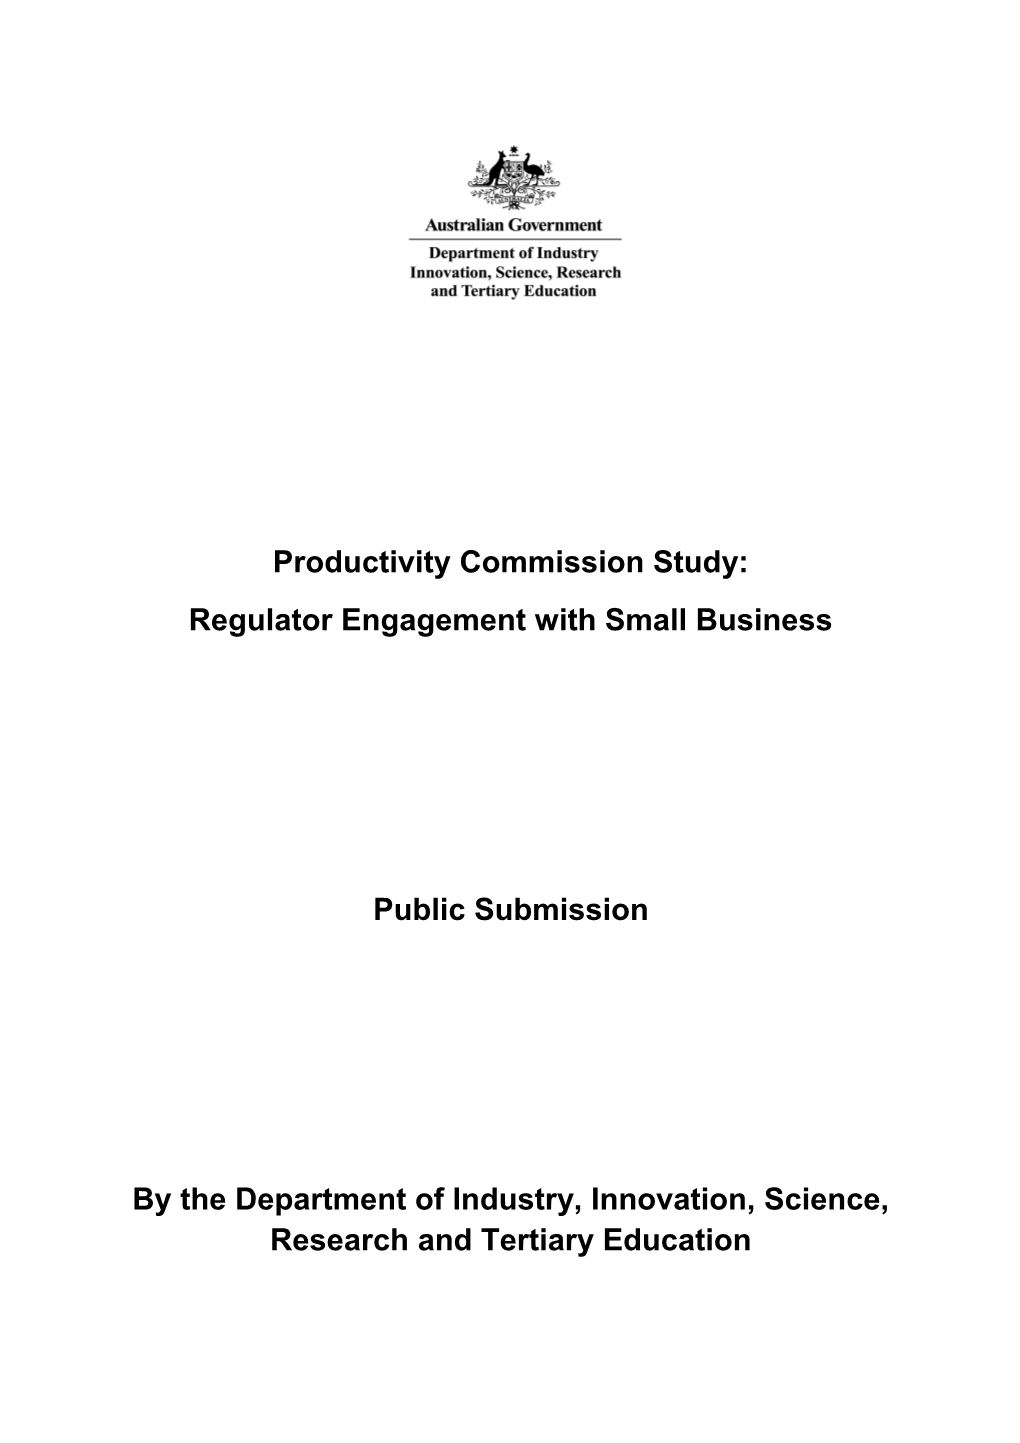 Submission 18 - Department of Industry, Innovation, Science, Research & Tertiary Education